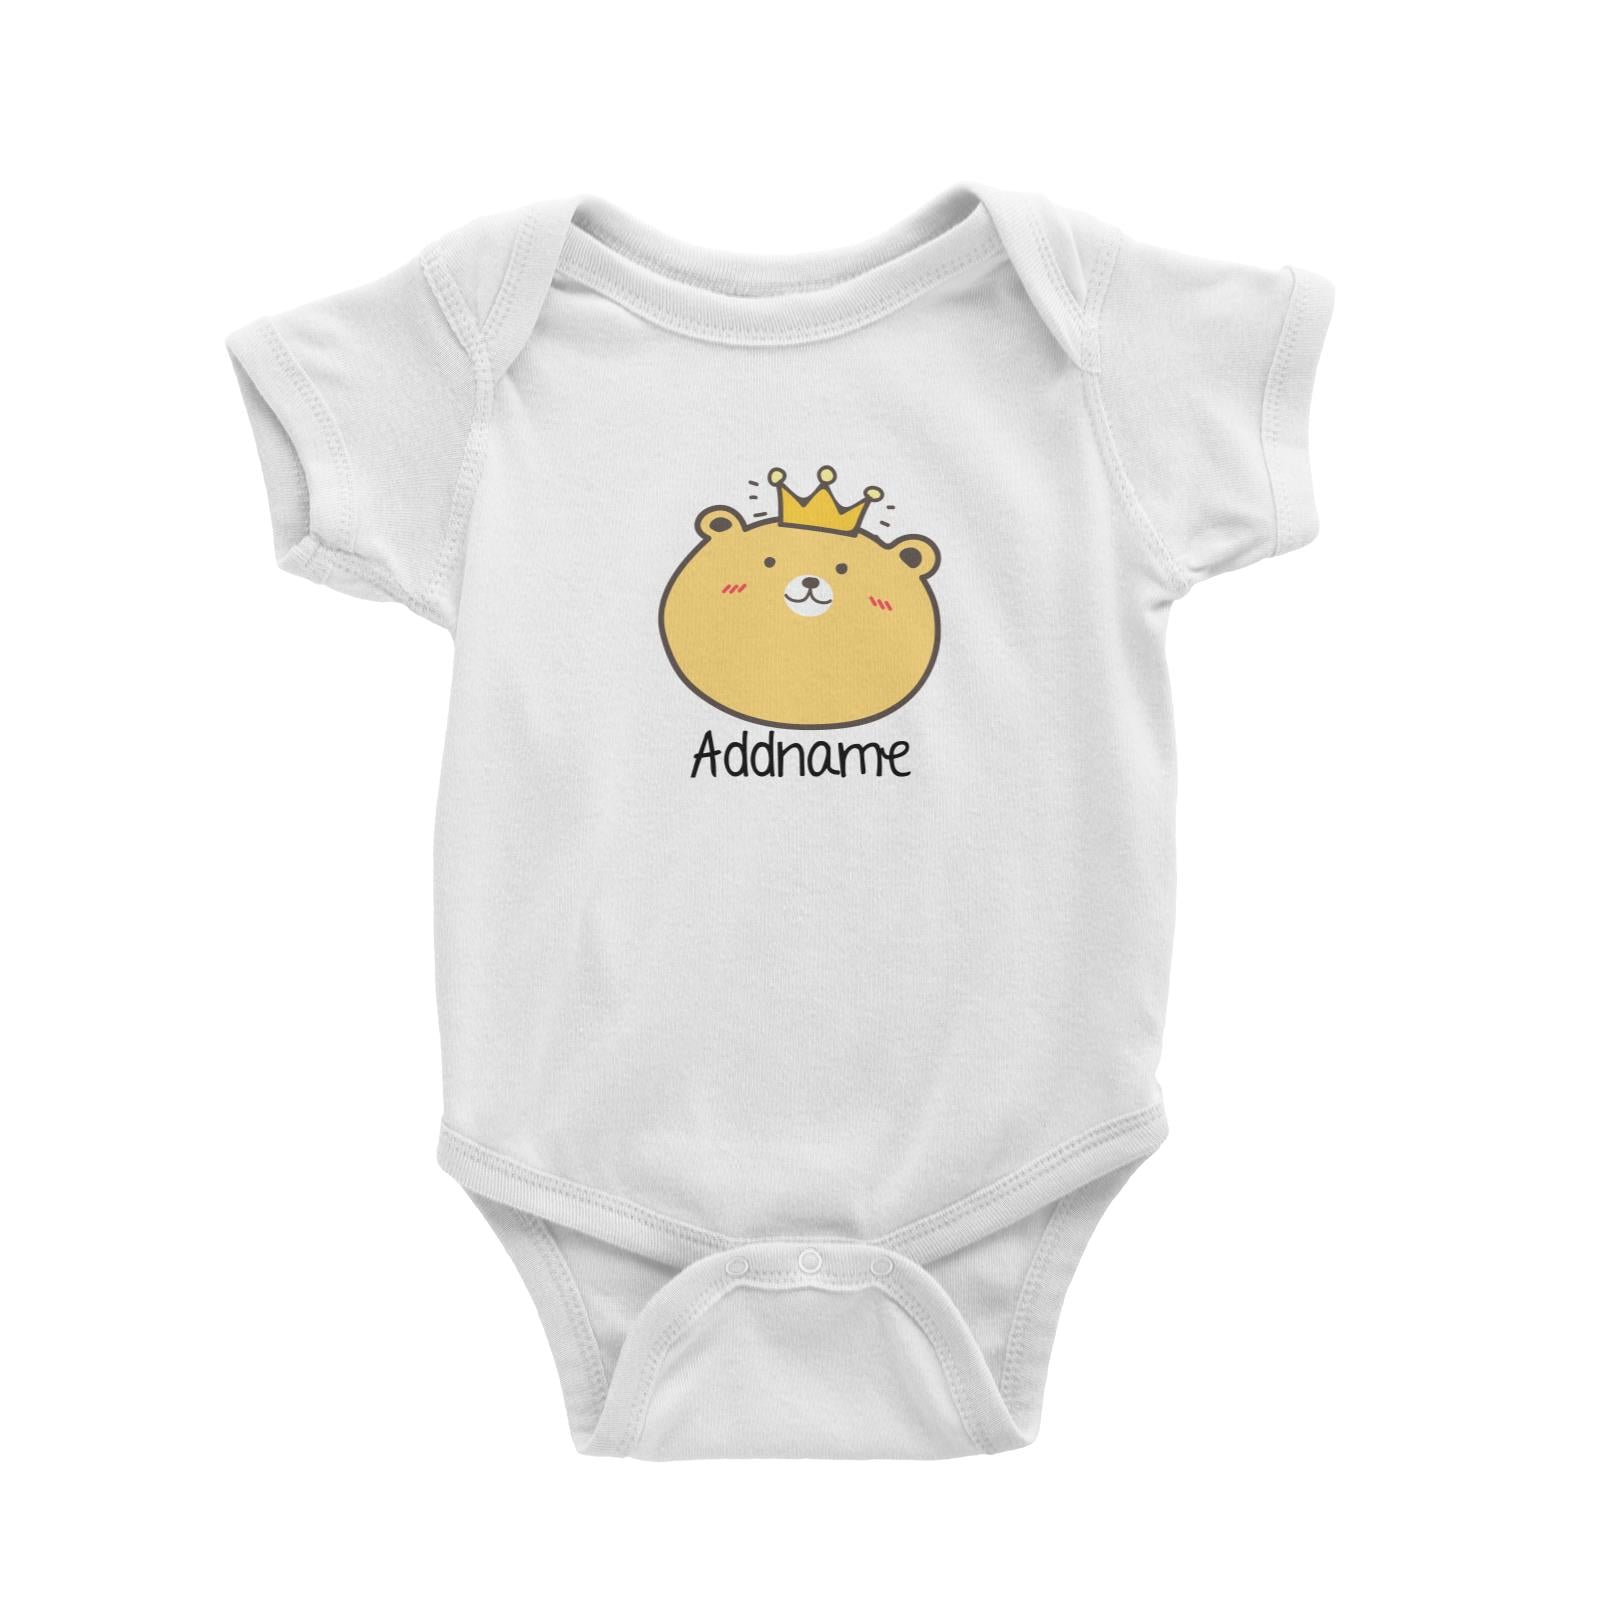 Cute Animals And Friends Series Cute Yellow Bear With Crown Addname Baby Romper